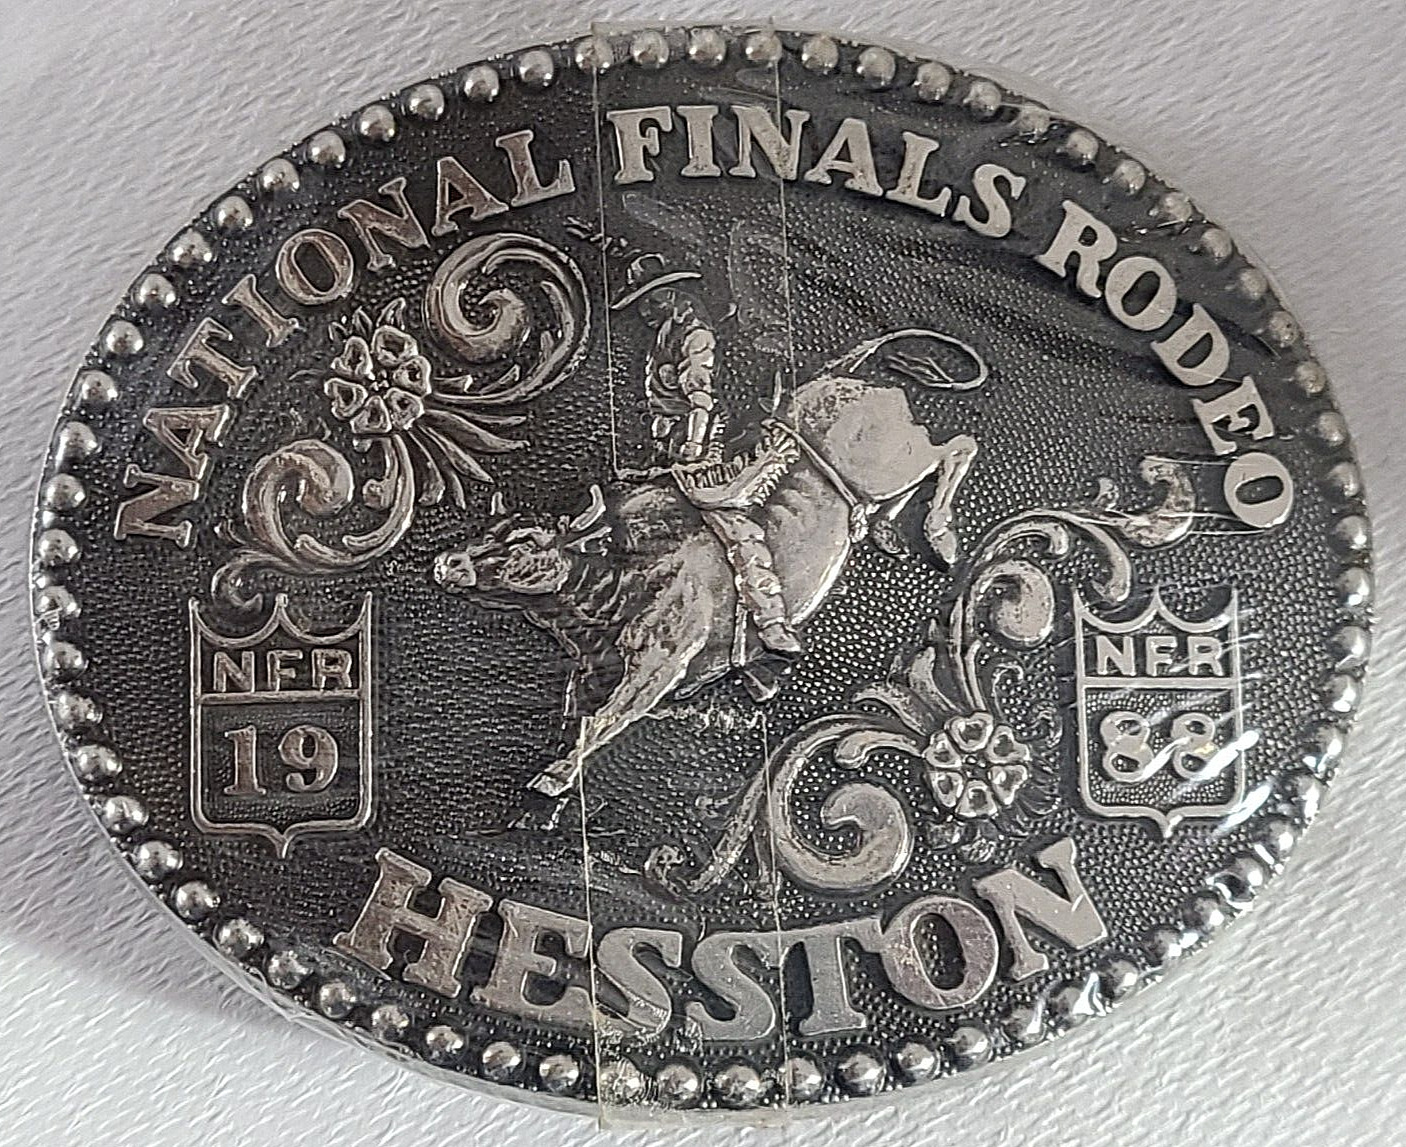 VTG National Finals Rodeo Hesston 1988 NFR Adult Cowboy Buckle NEW